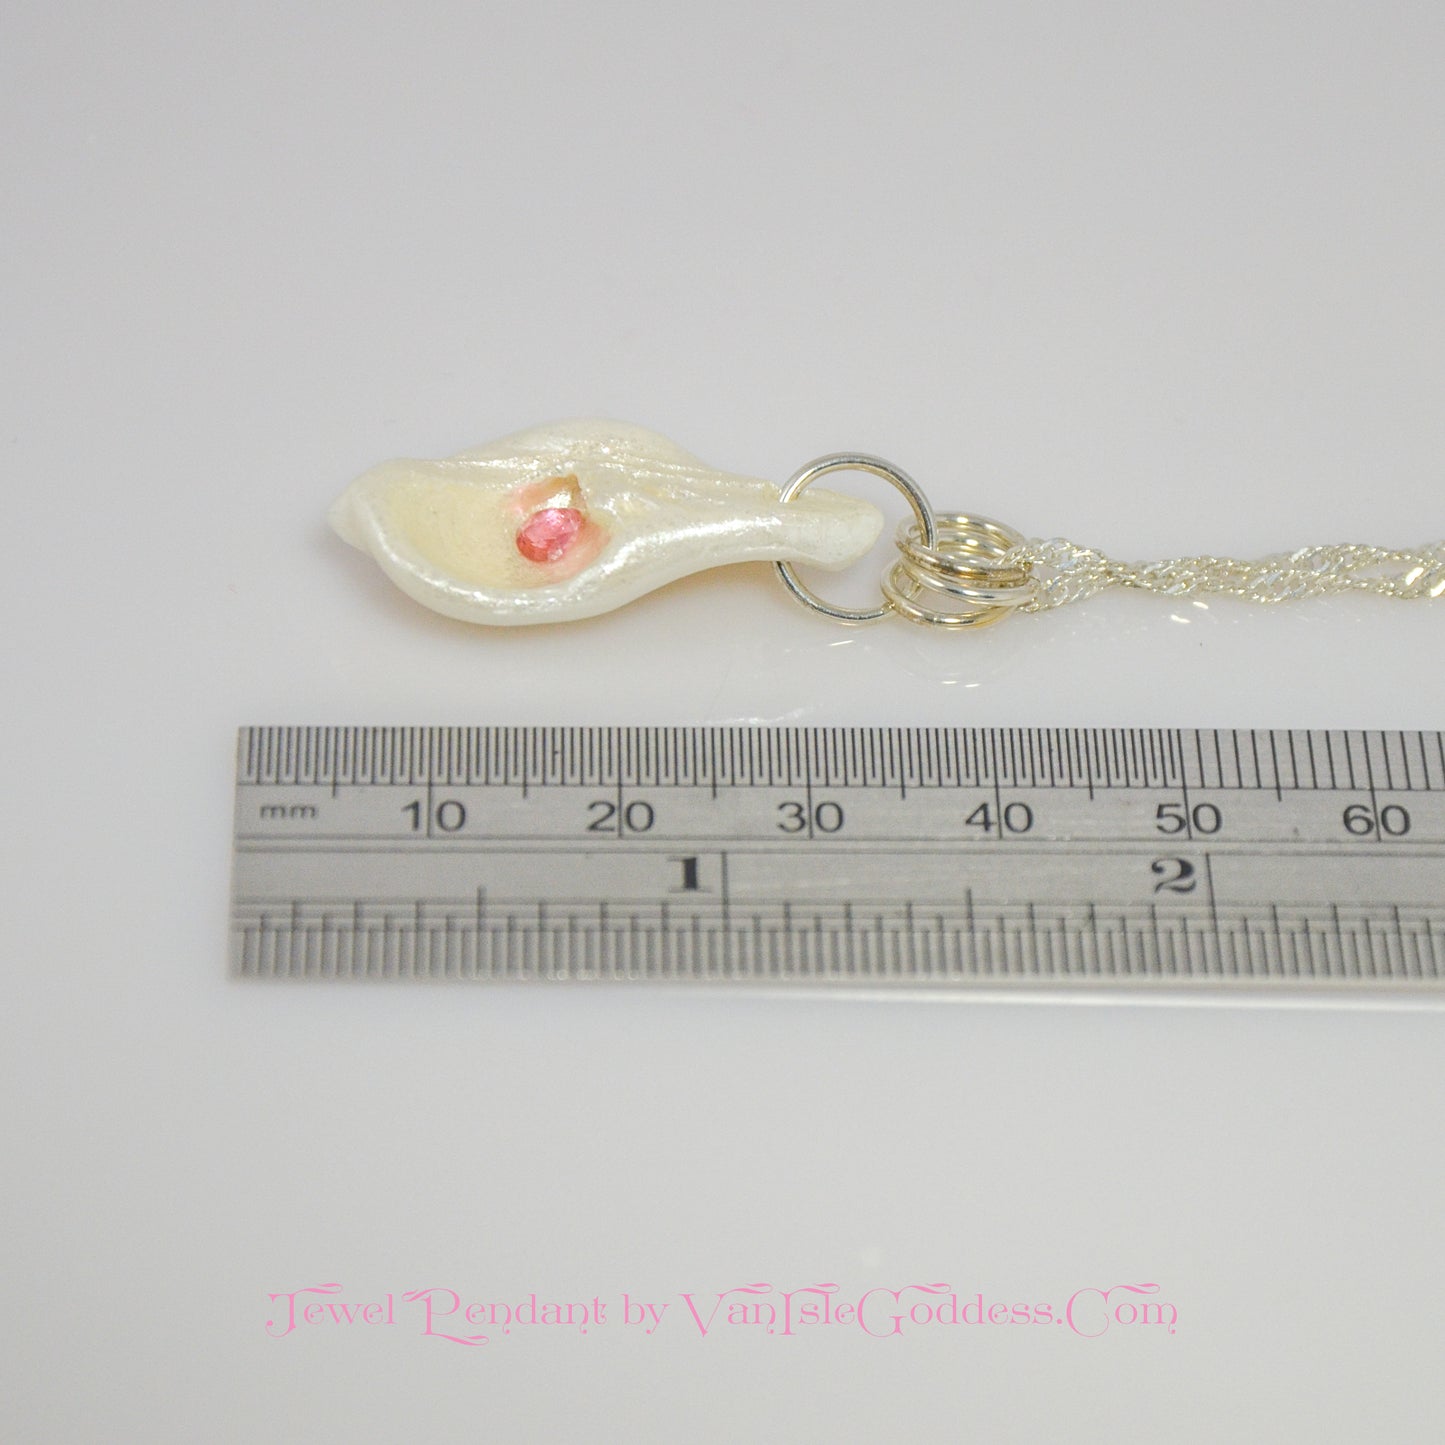 Jewel natural seashell with a real teardrop shaped rose cut pink tourmaline gemstone compliments the pendant. The pendant is shown along side a ruler so the viewer can see the length of the pendant.